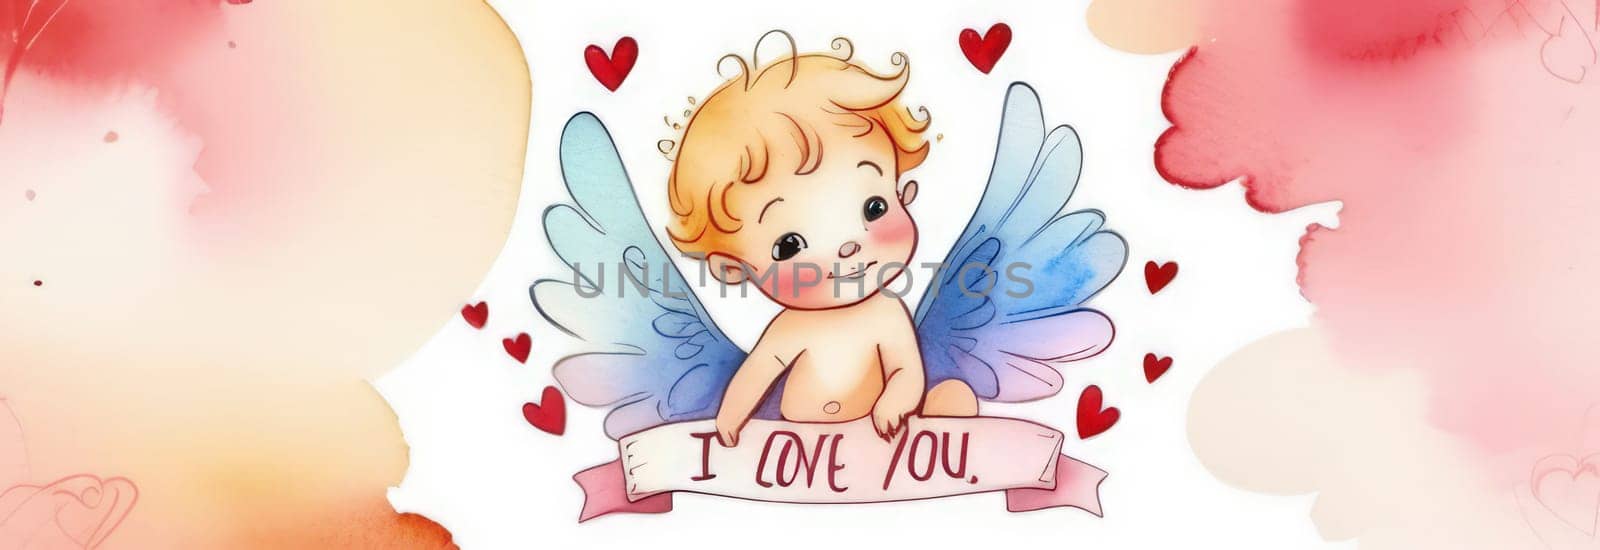 Illustration watercolour of greeting card white, cute, funny baby cupid angel with gold curly hair on pastels background. Promotion, shopping template for love and valentines, mothers day concept. by Angelsmoon